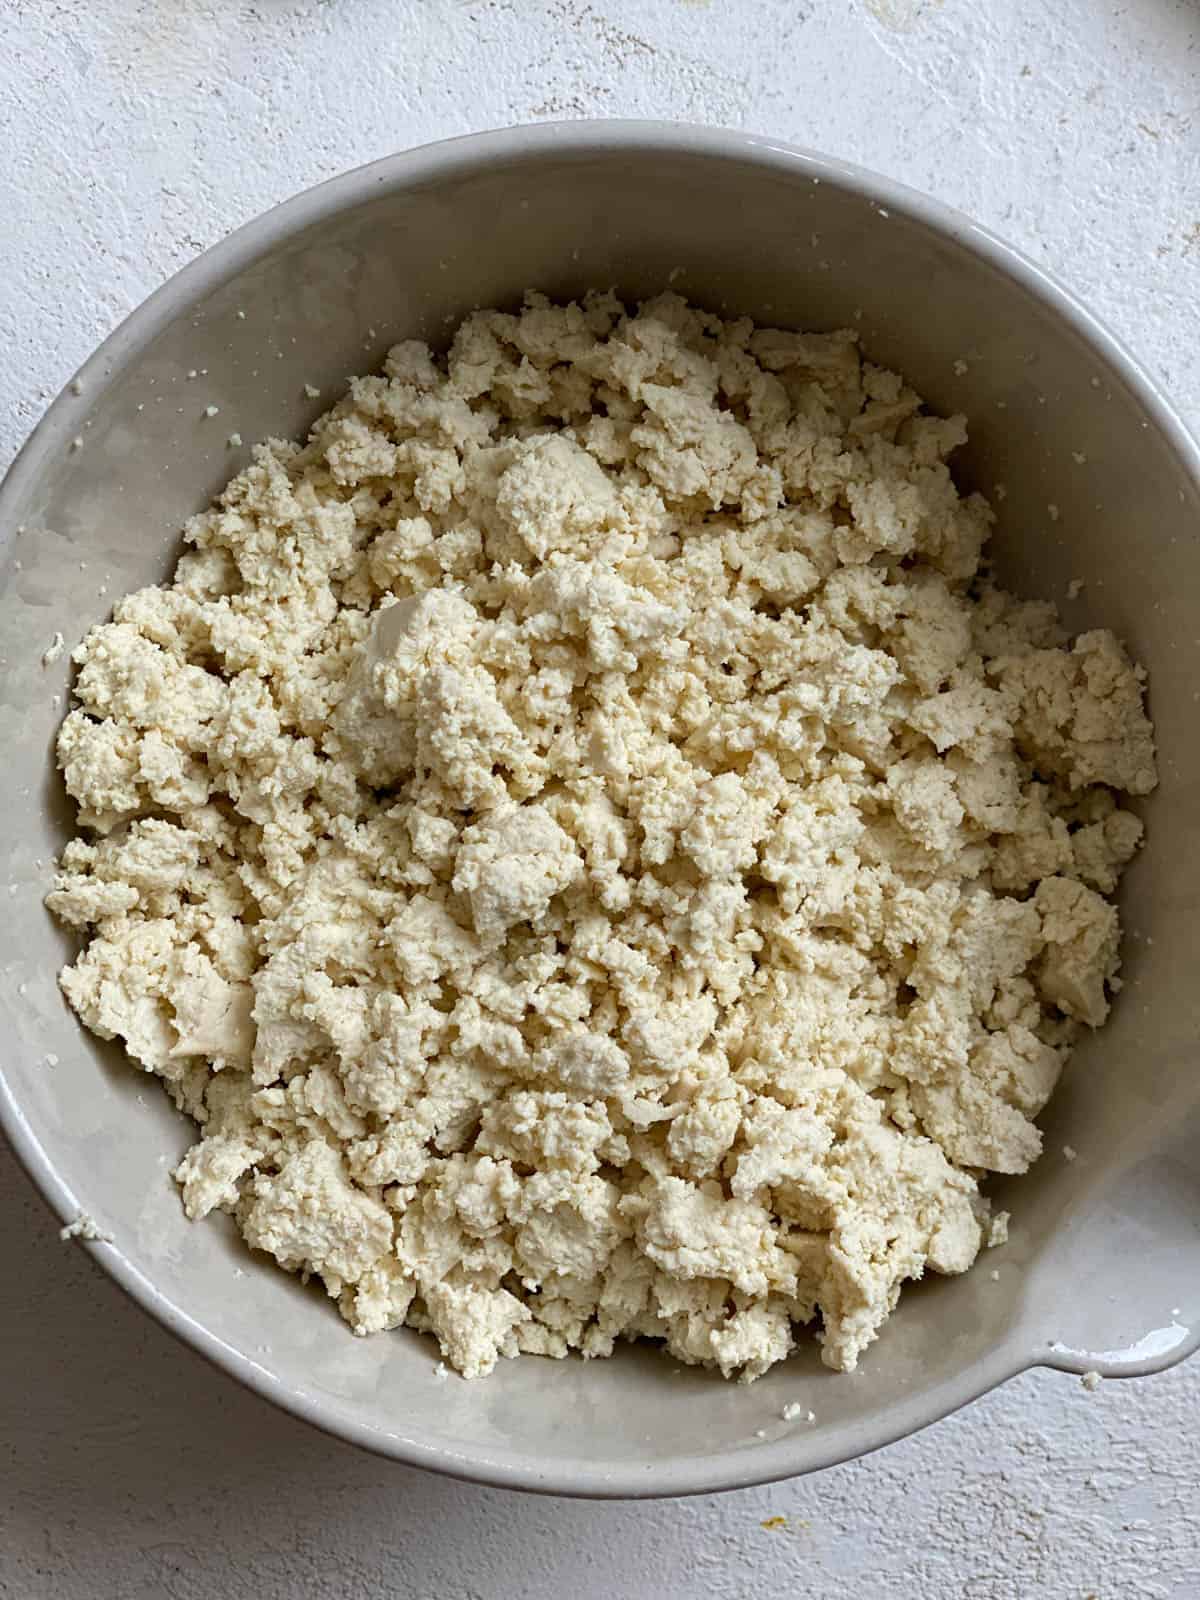 crumbled tofu in a bowl against a white surface